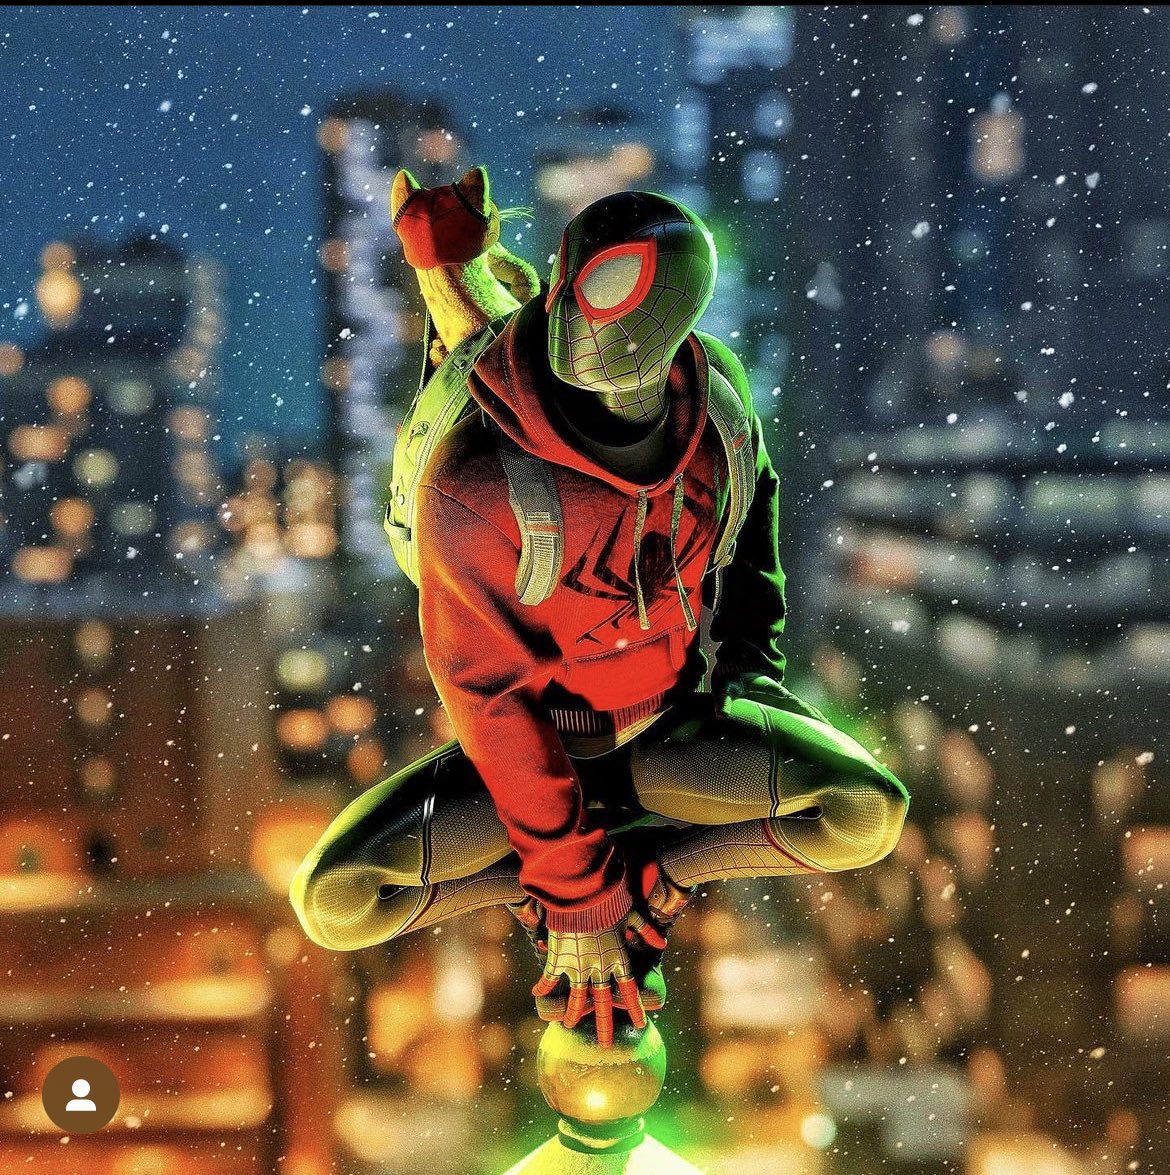 #SpiderMan #SpidermanPS5 #MilesMorales #PSBlog #PS5 #PS5Share #ArtisticofSociety #VirtualPhotography #WorldofVP #PhotoMode #TheCapturedCollective #ThePhotoMode #VPGamer #VPEclipse